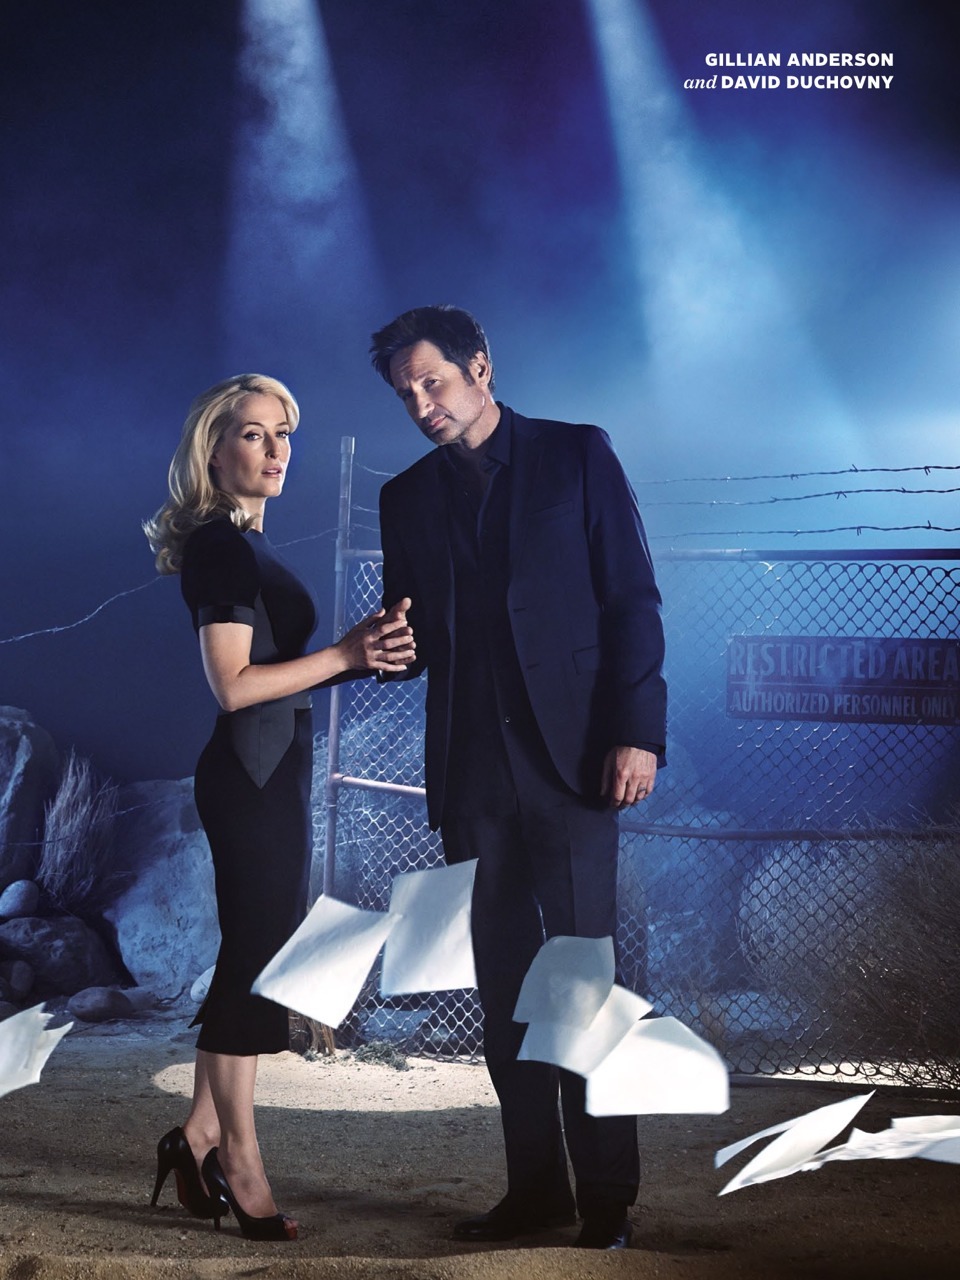 laurapalmerwalkswithme:David Duchovny and Gillian Anderson to Reprise Their Roles